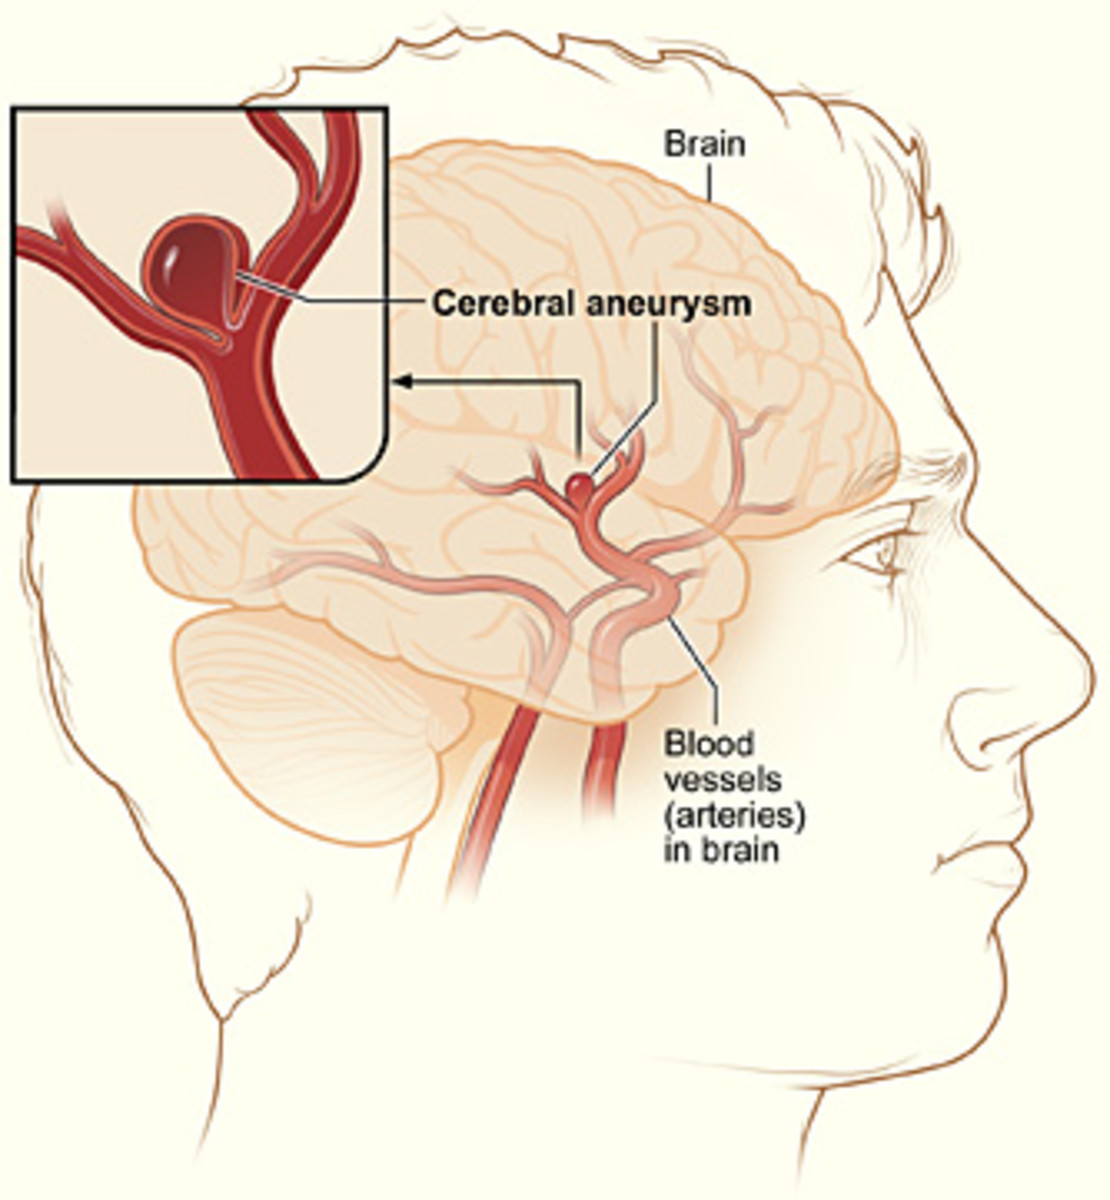 An aneurysm is the swelling of the wall of a blood vessel.